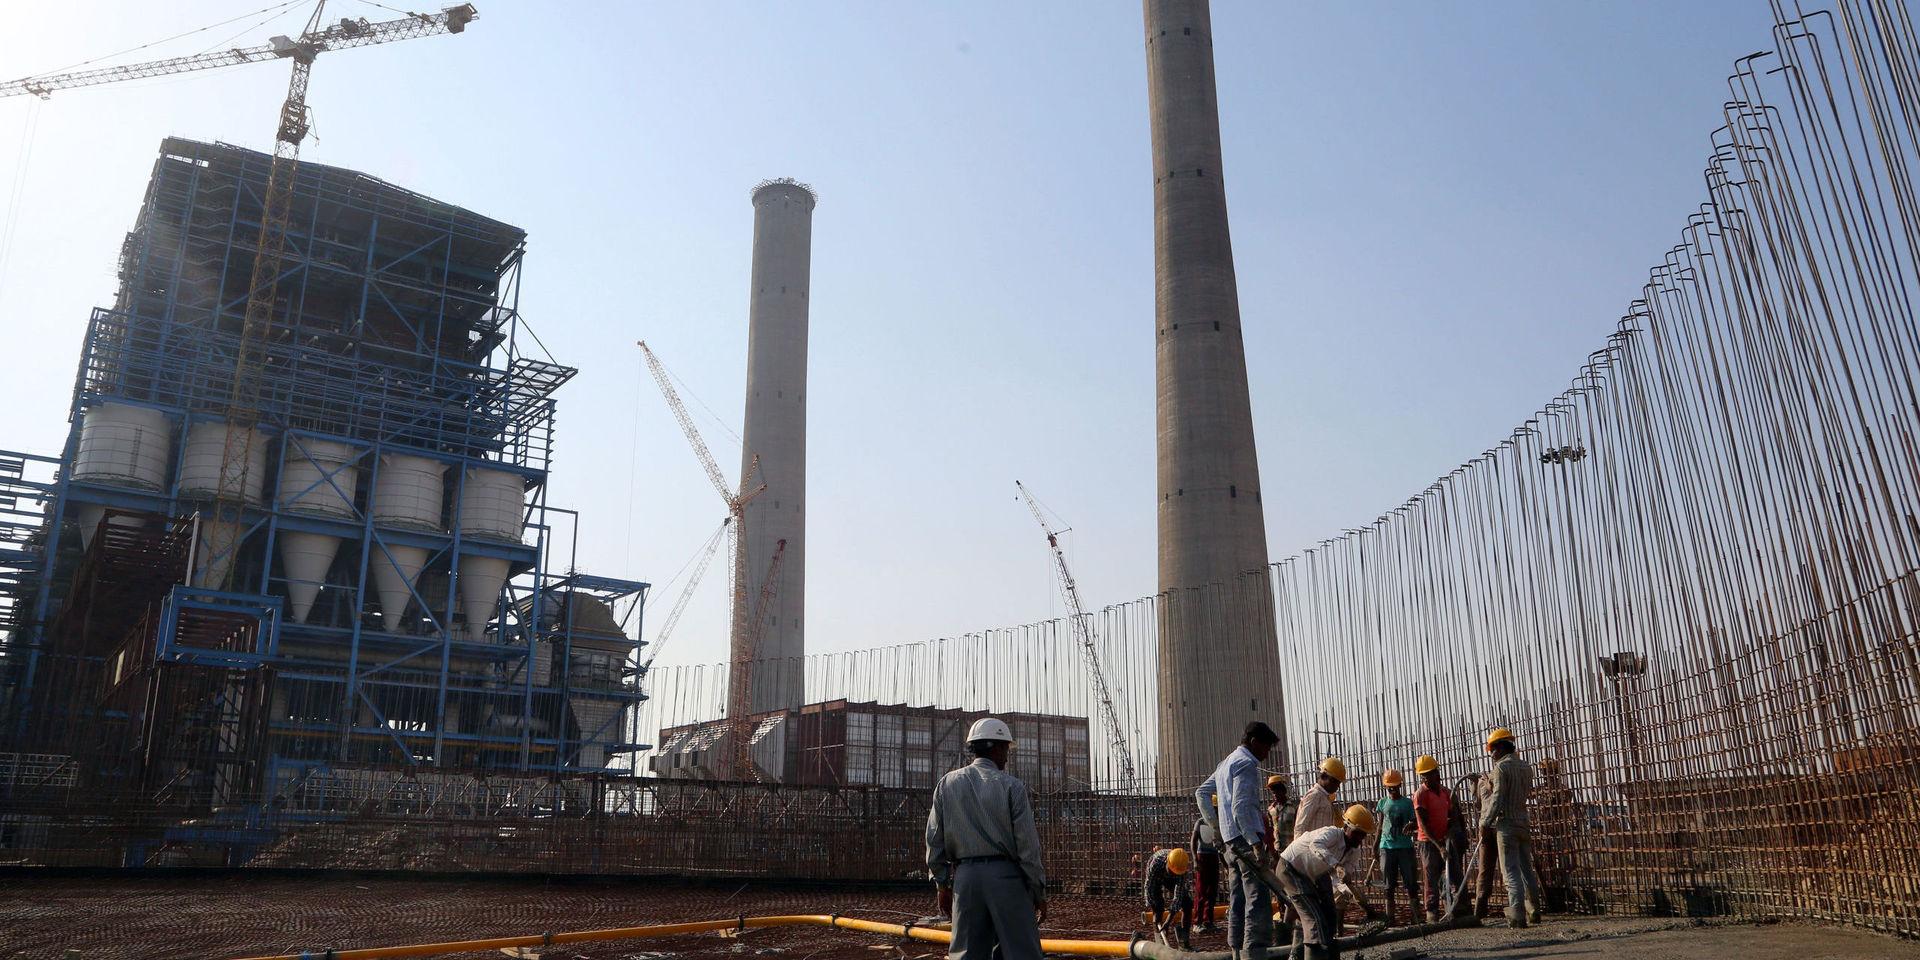 FILE - In this Feb. 24, 2015 file photo, workers lay cement to build a concrete structure at the under-construction coal-fired power plant, partially financed by the Japan Bank for International Cooperation, in Kudgi, India. A compromise struck by the United States, Japan and several other major nations will restrict export financing to build coal power plants overseas, but not eliminate it completely. The agreement reached Tuesday, Nov. 17 is an important step forward that sends a strong political message ahead of upcoming international climate change negotiations in Paris, an American official and environmentalists said. (AP Photo/Aijaz Rahi, File)